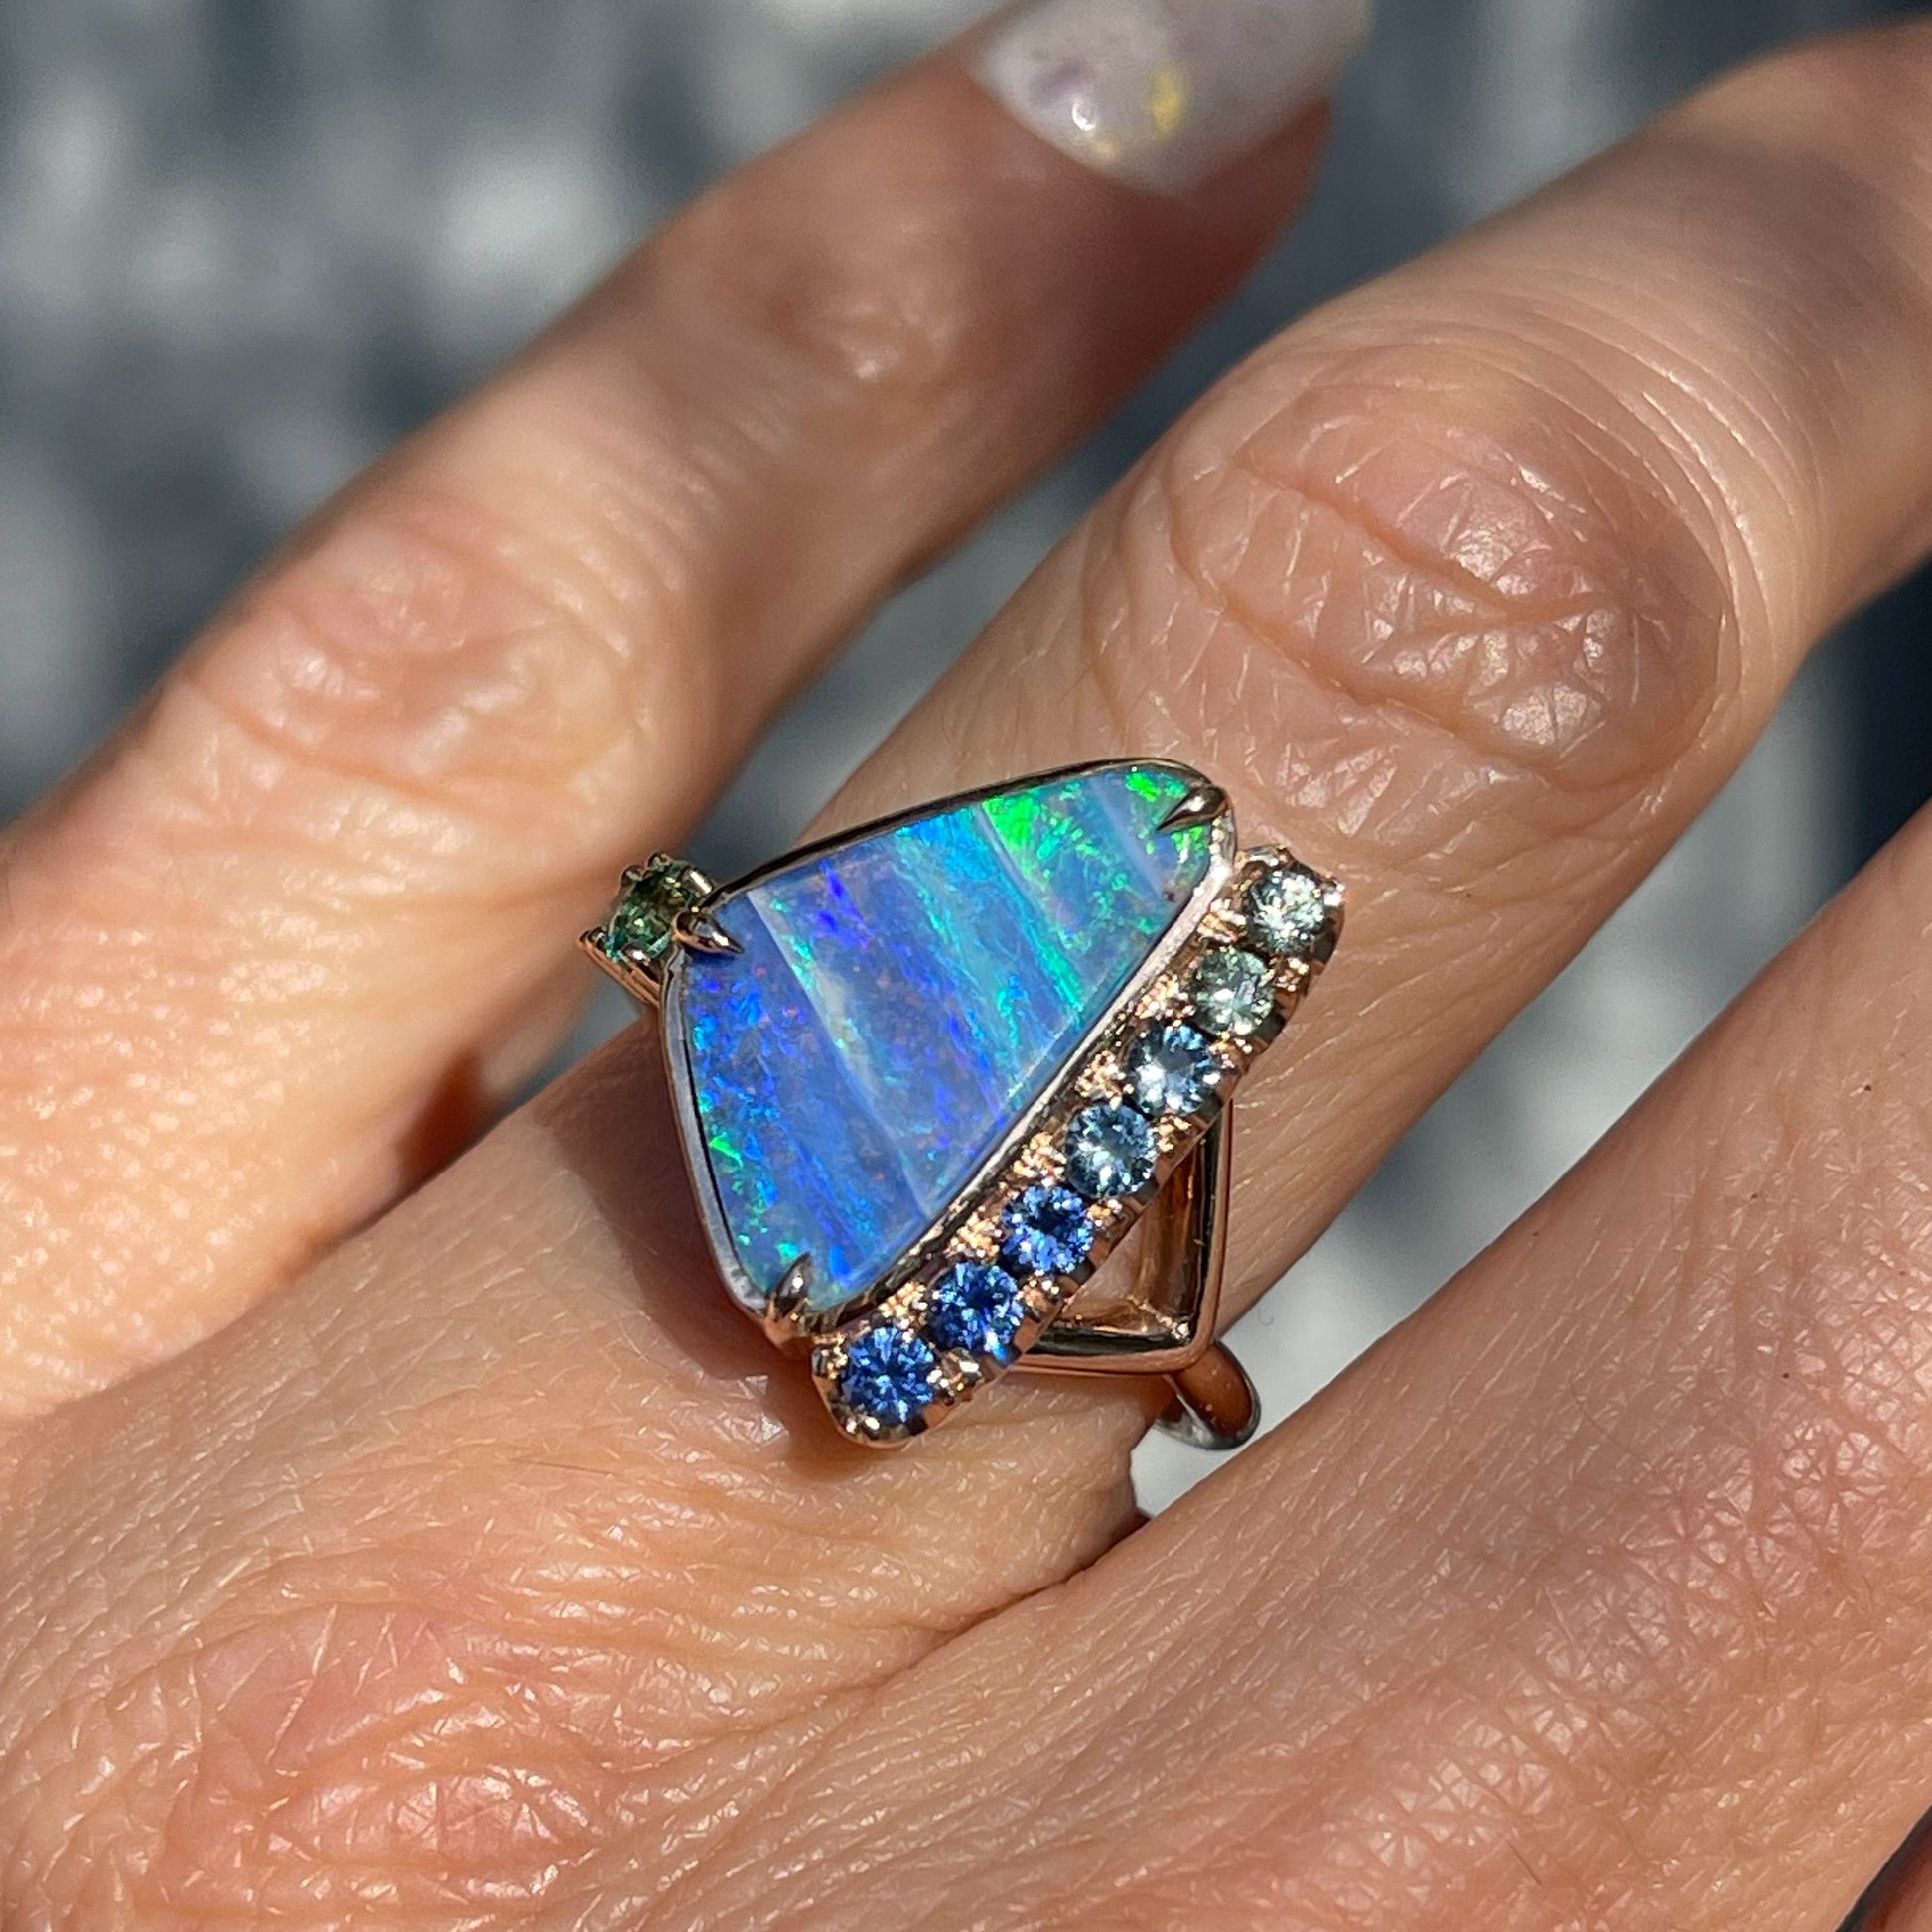 An Australian Opal Ring by NIXIN Jewelry. The Boulder Opal ring is set in rose gold.